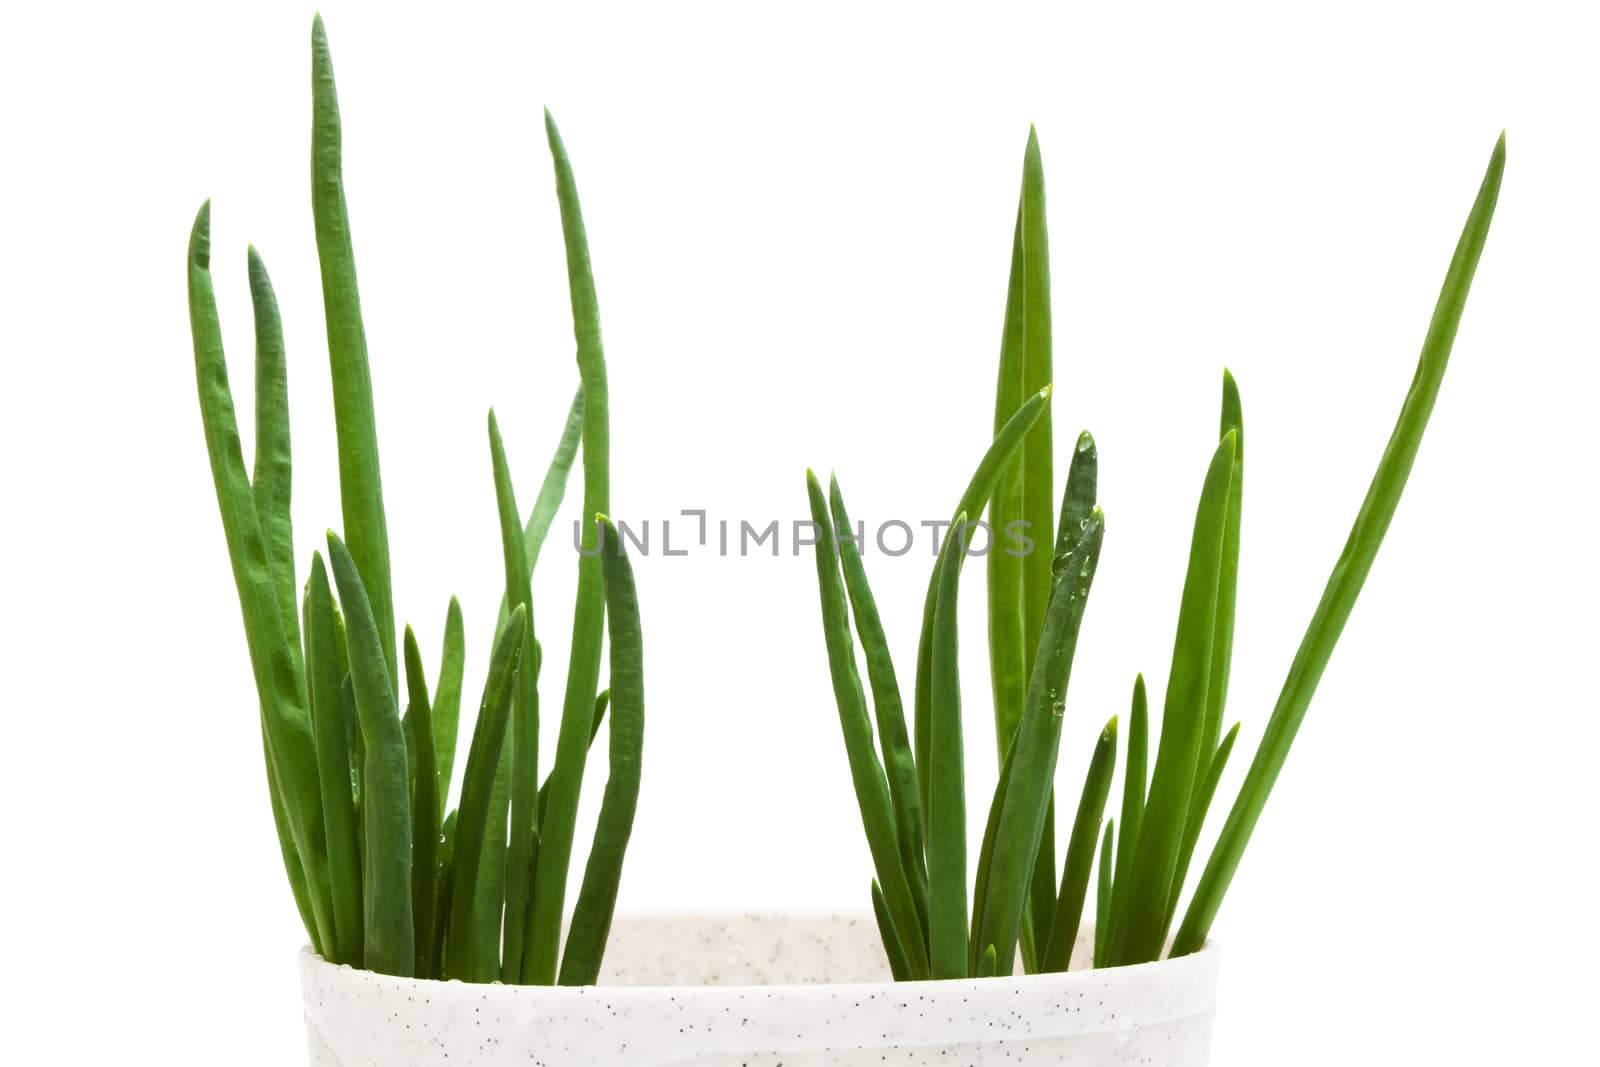 fresh spring onions on a white background